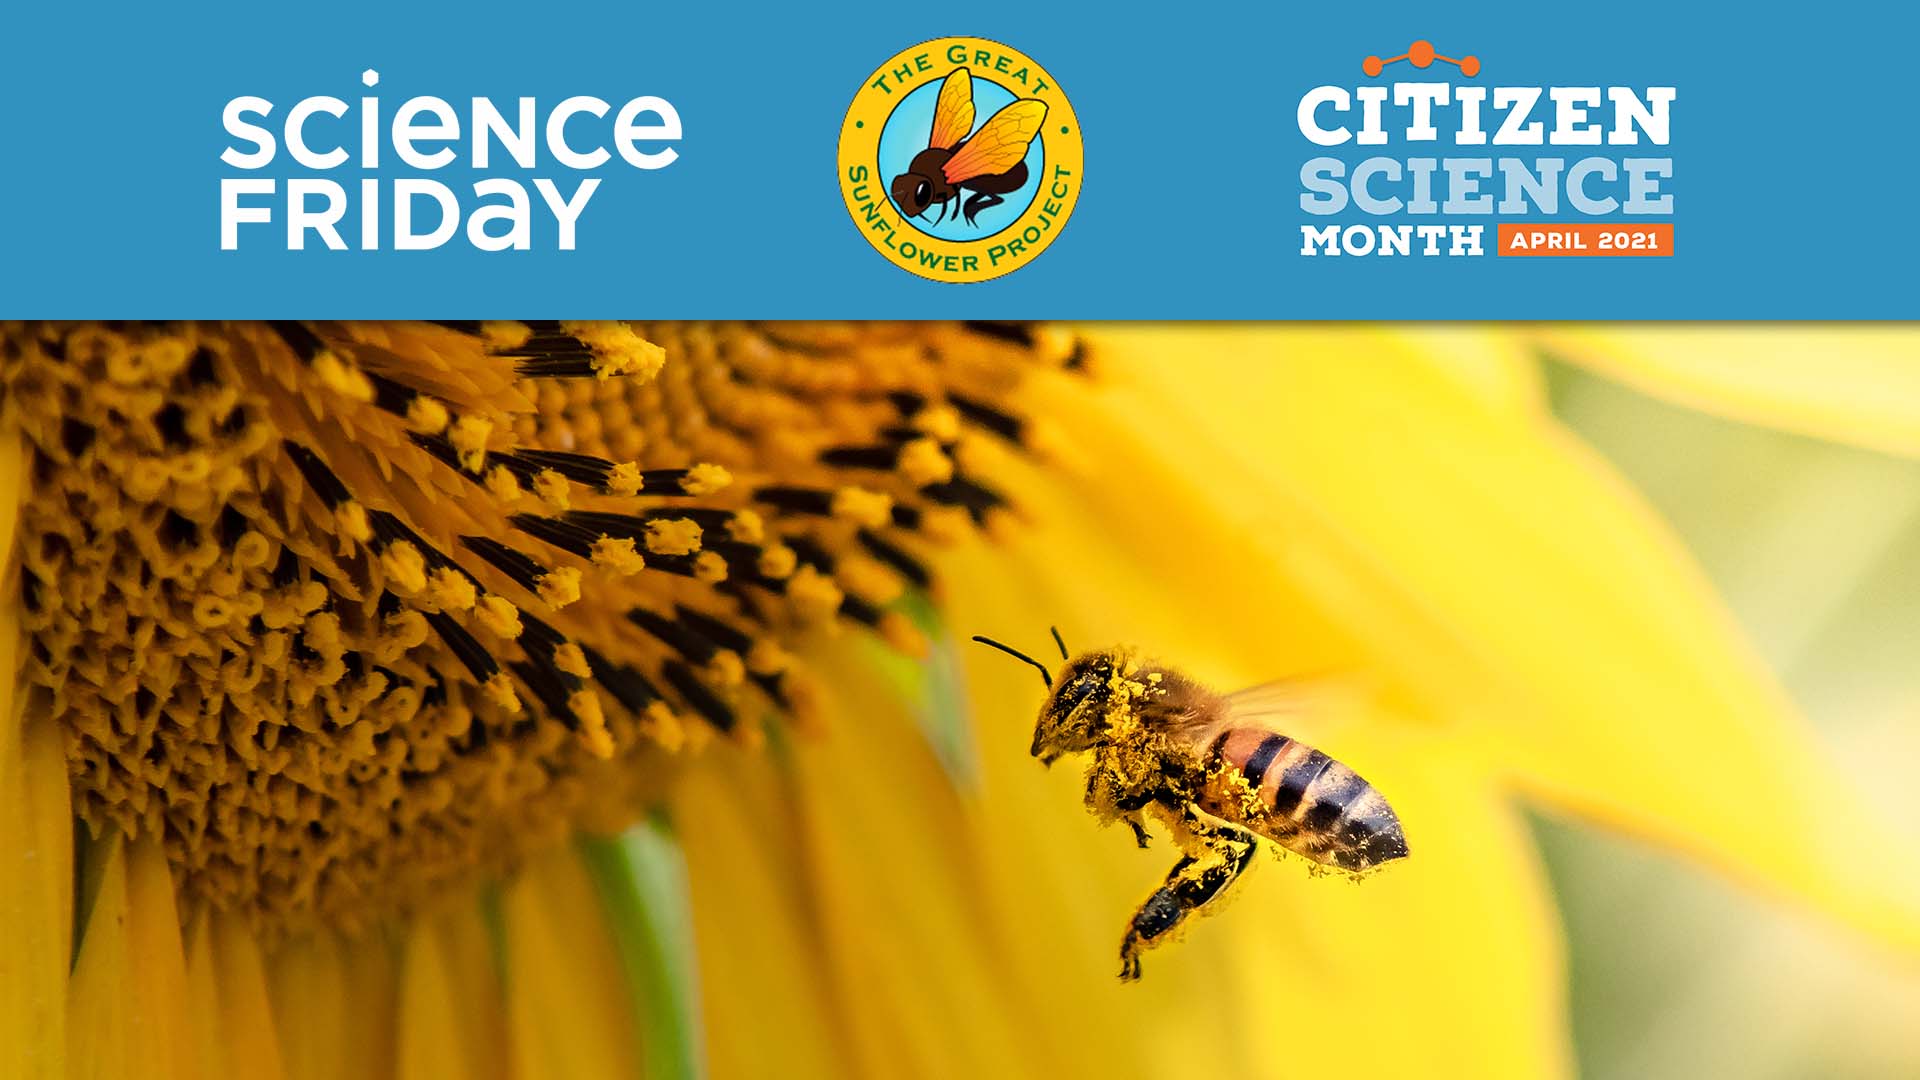 a bee with pollen on its face and legs, flying toward the middle of a sunflower, with a banner featuring the logos for science friday, the great sunflower project, and citizen science month april 2021